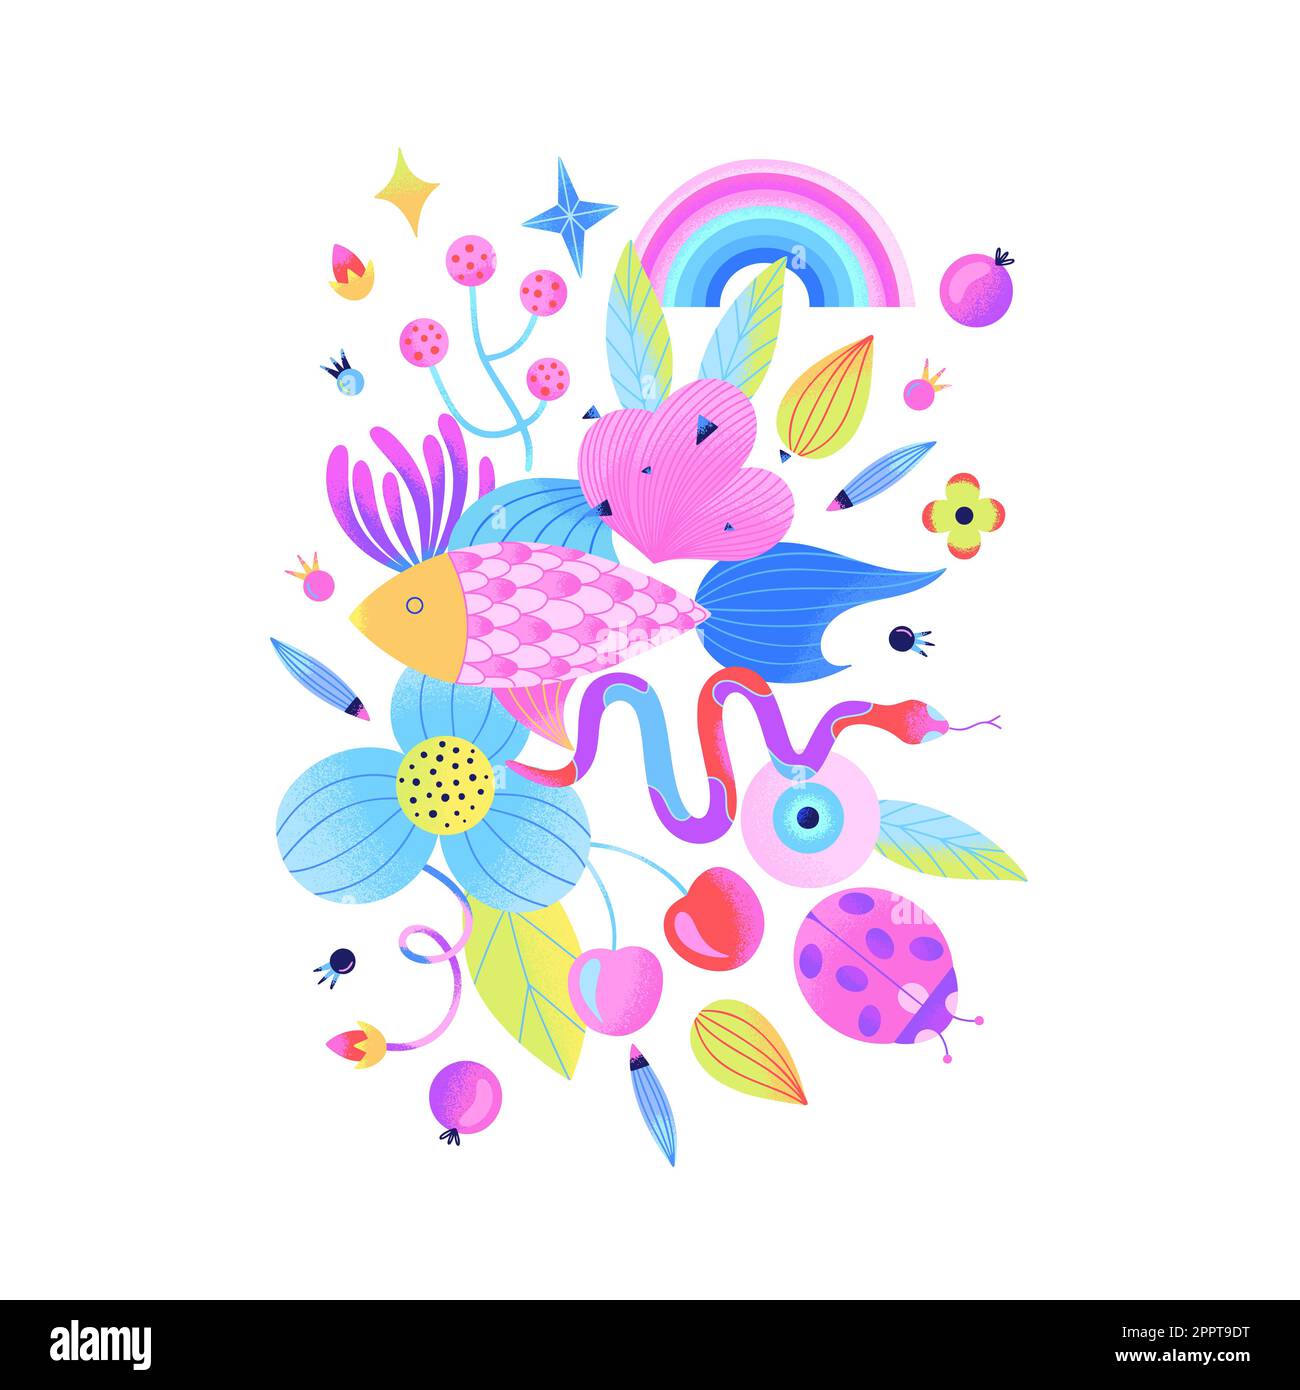 Bright psychedelic composition of fish, snake, flowers, ladybug, berries, rainbow isolated on white background. Contemporary Art. Magical and summer mood. Cover of notebook, print on t-shirt, poster Stock Vector